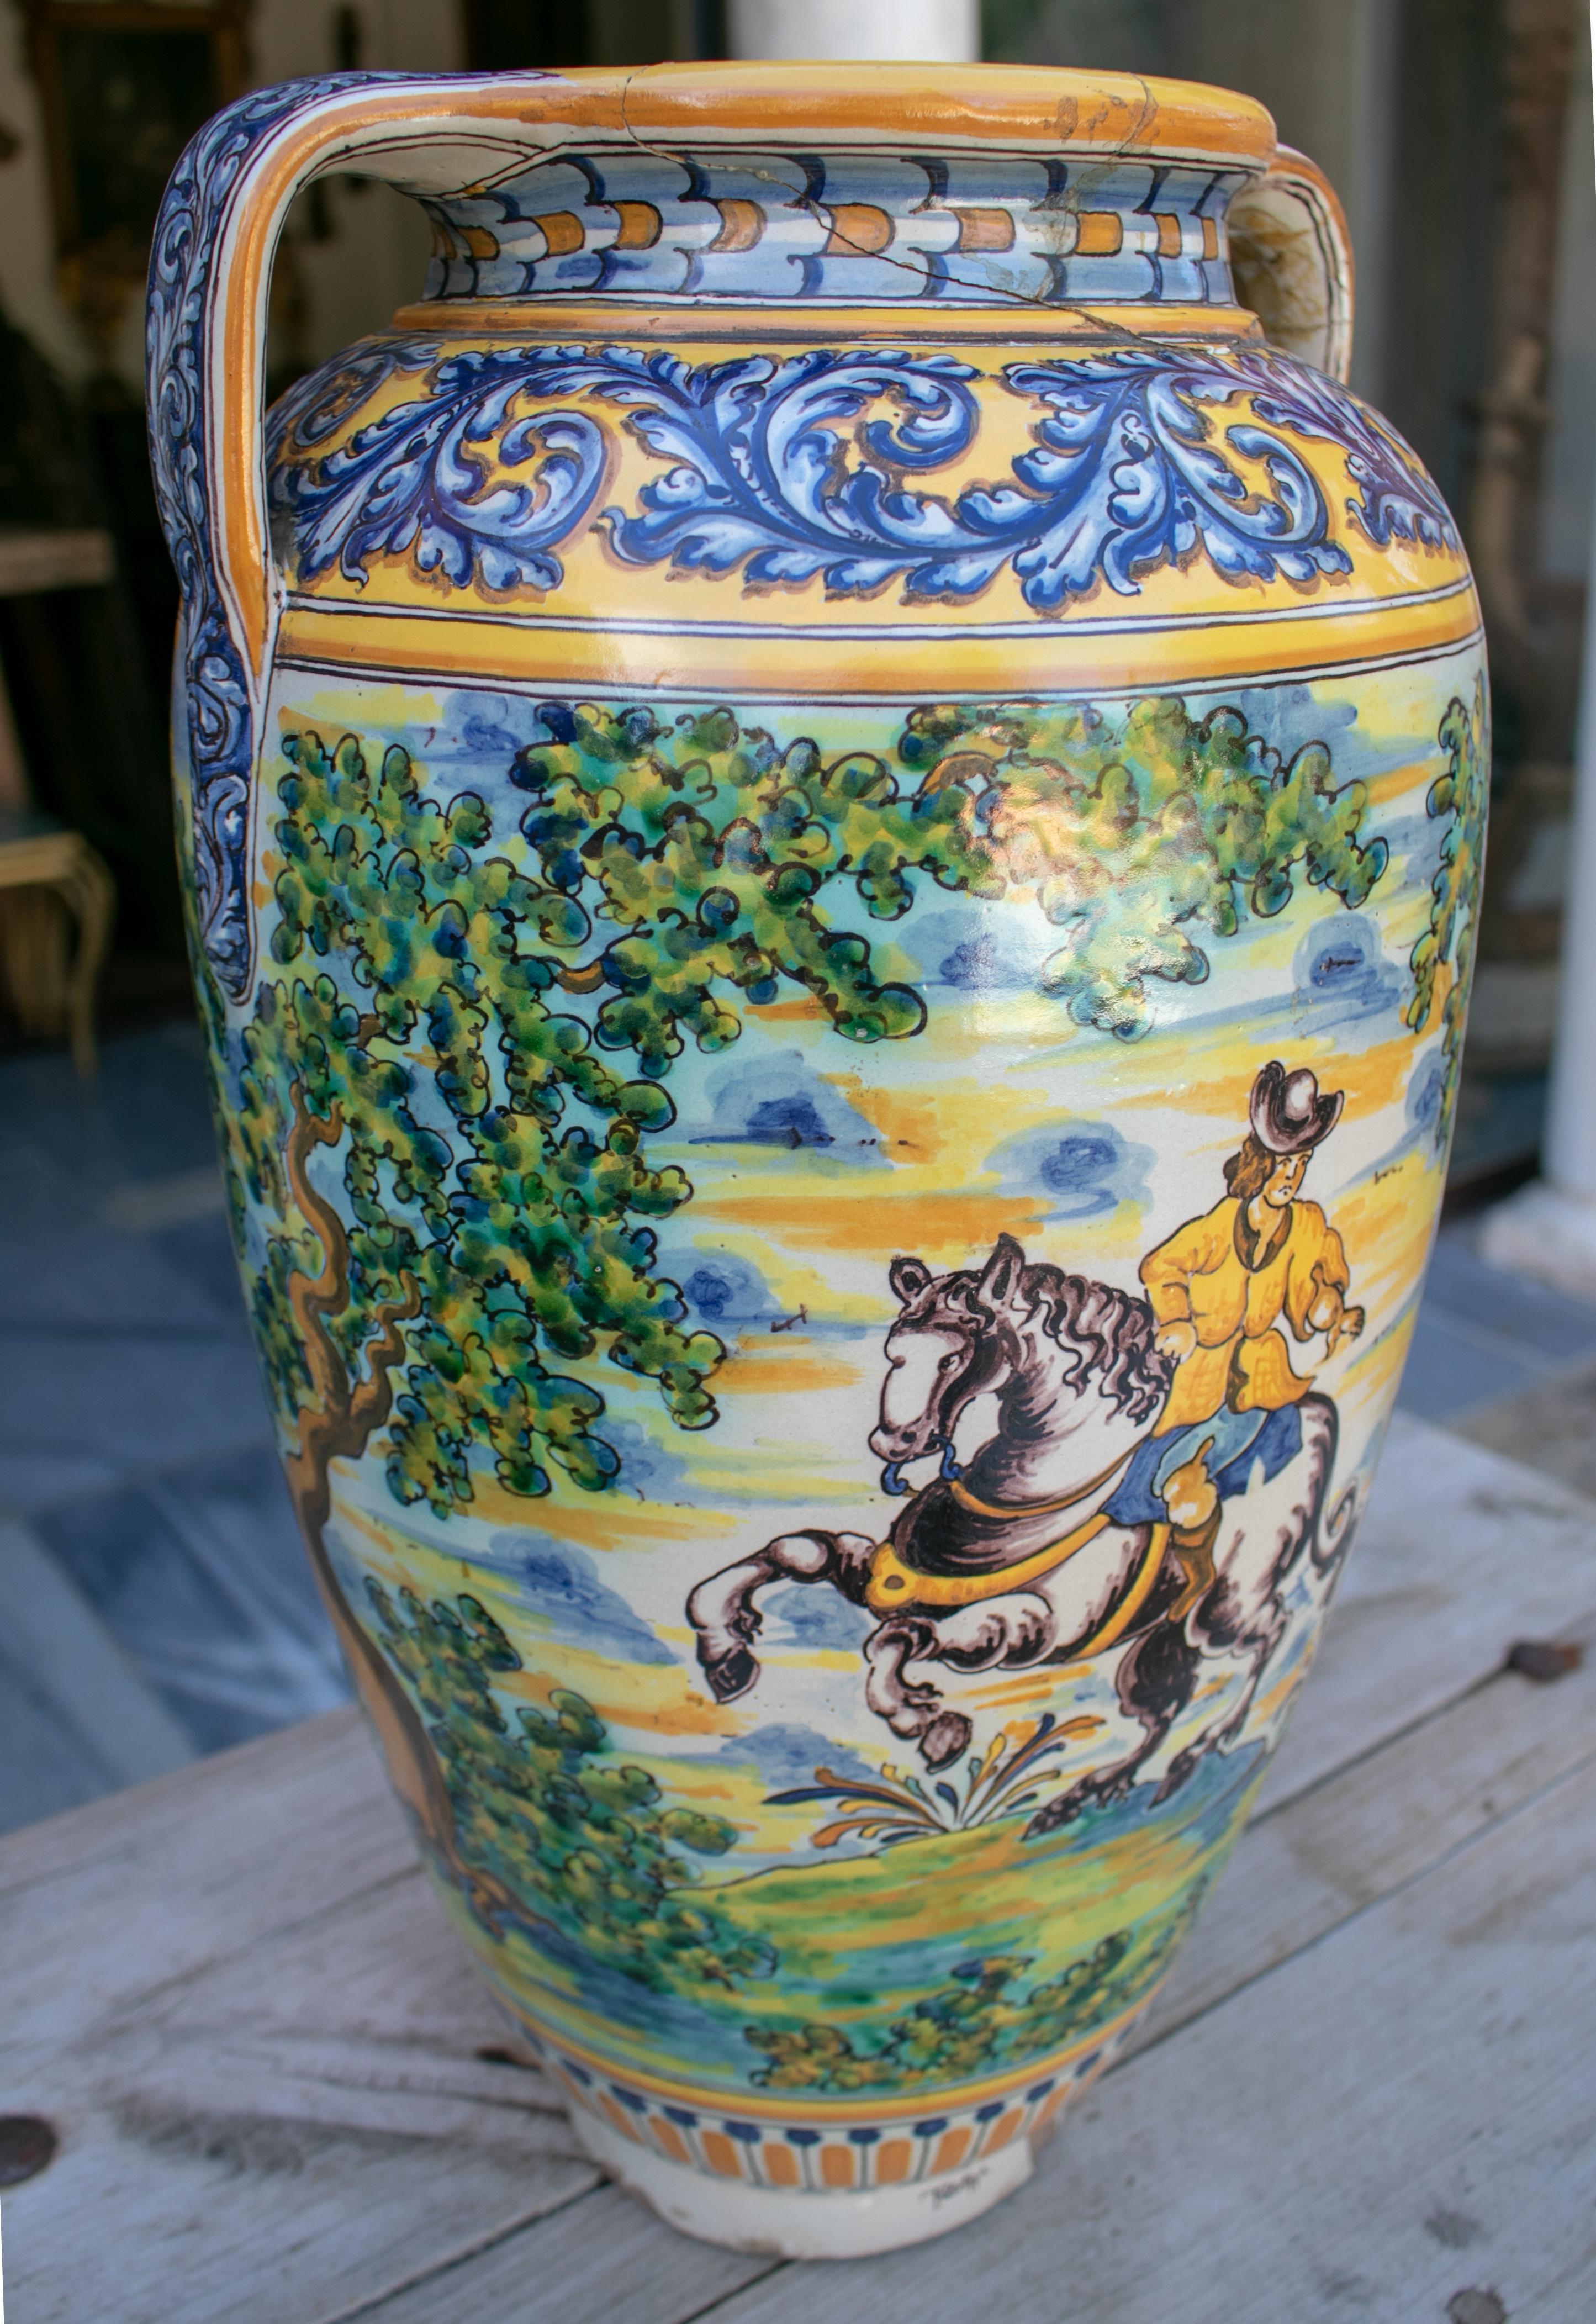 Hand-Painted 19th Century Spanish Talavera Porcelain Vase with Animals and Horse Rider Scenes